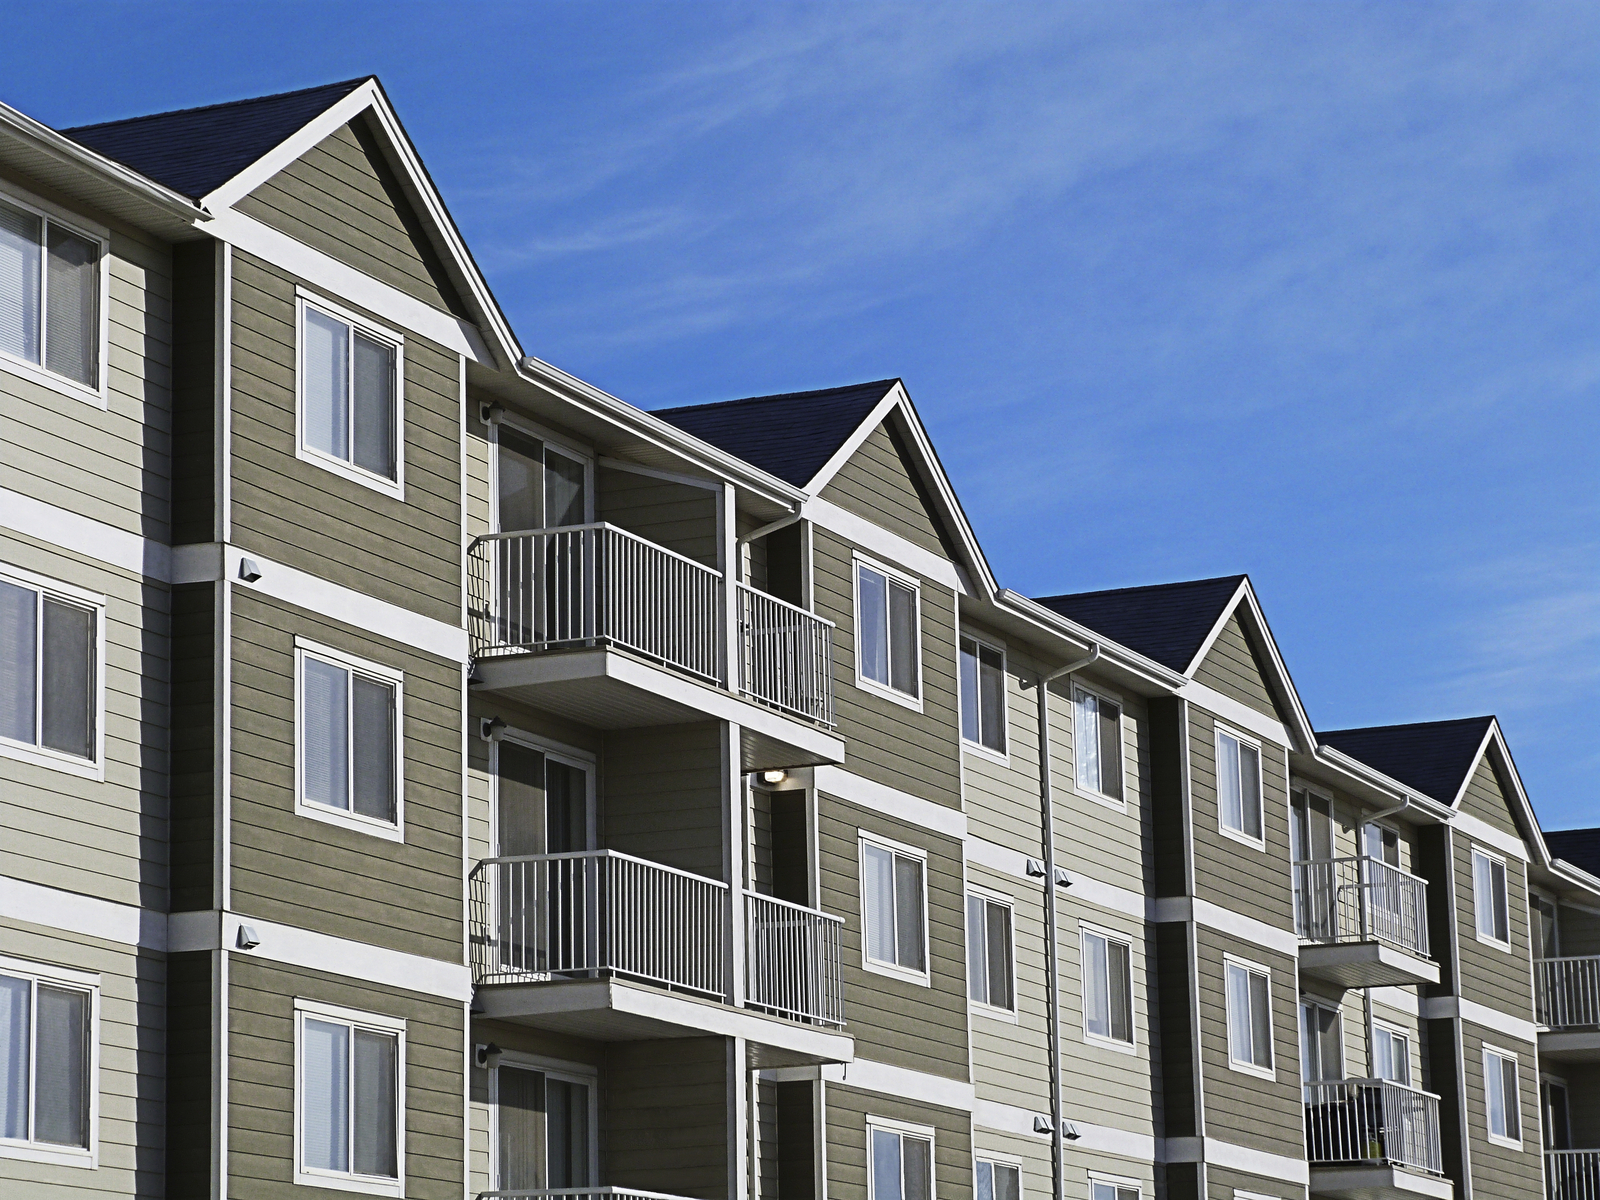 A row of a modern apartment complex development with a bright blue sky.